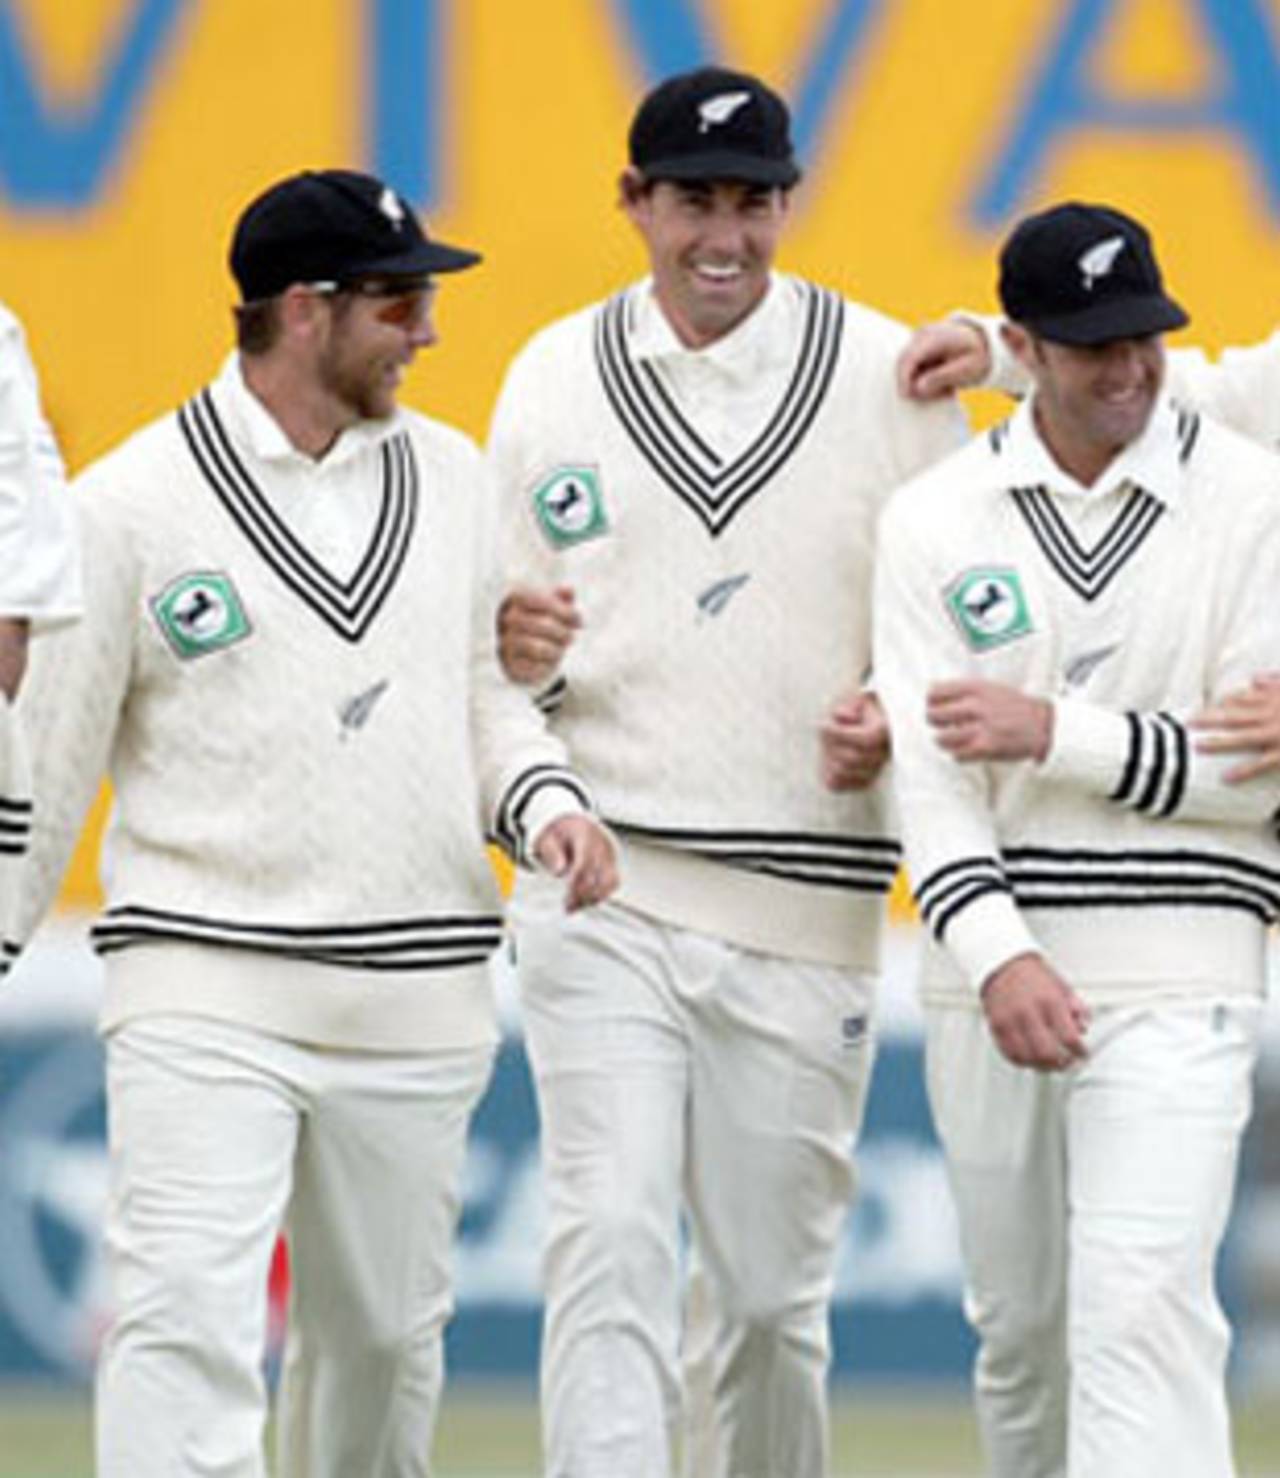 New Zealand players celebrate the dismissal of Indian batsman Sourav Ganguly, caught by Vincent from the bowling of Shane Bond for 17, as they leave the field for lunch. From left: Daryl Tuffey, Craig McMillan, Stephen Fleming, Nathan Astle and Daniel Vettori. 1st Test: New Zealand v India at Basin Reserve, Wellington, 12-16 December 2002 (12 December 2002).